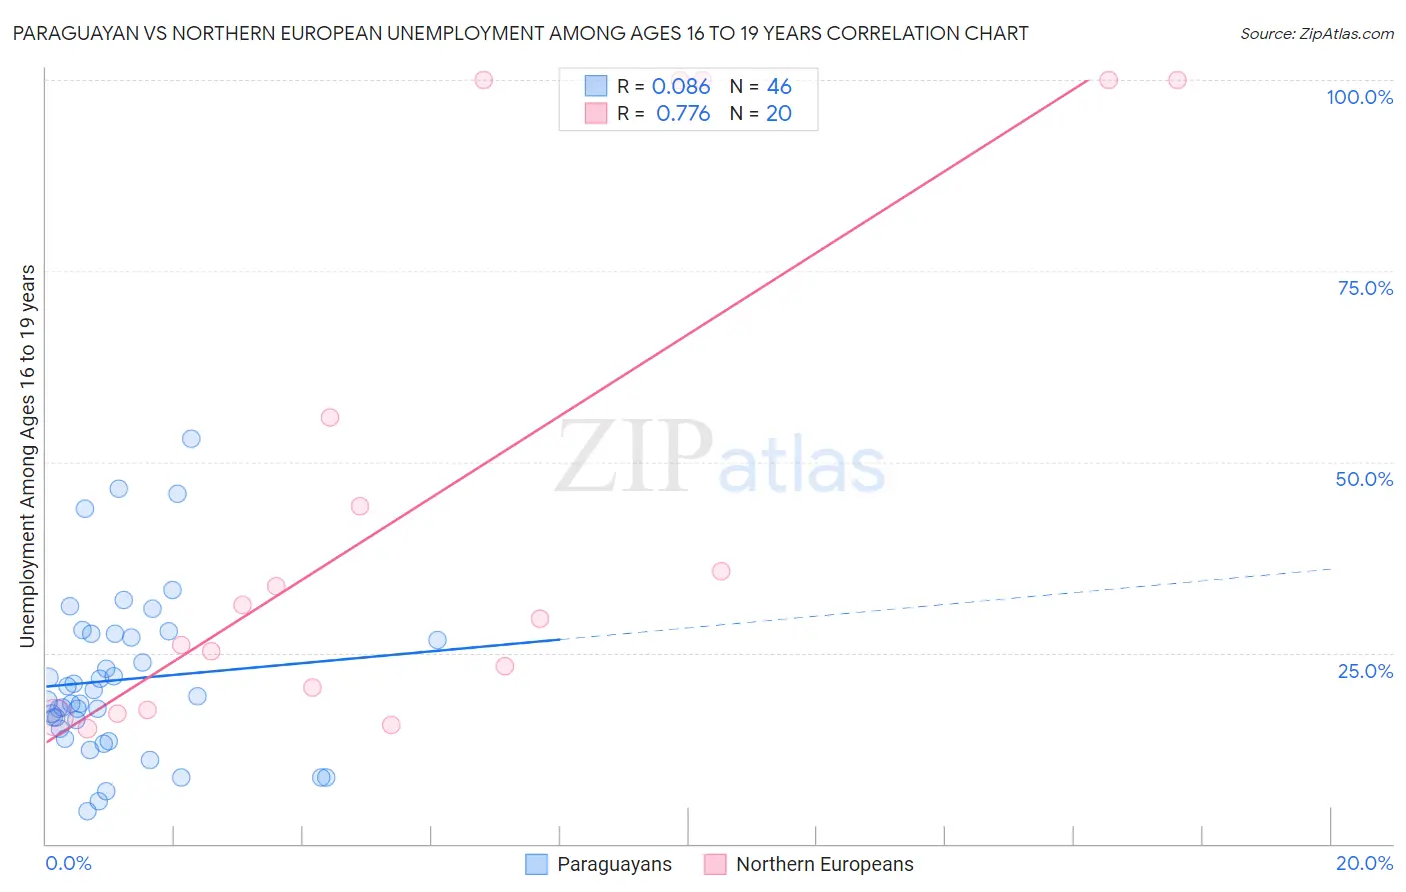 Paraguayan vs Northern European Unemployment Among Ages 16 to 19 years